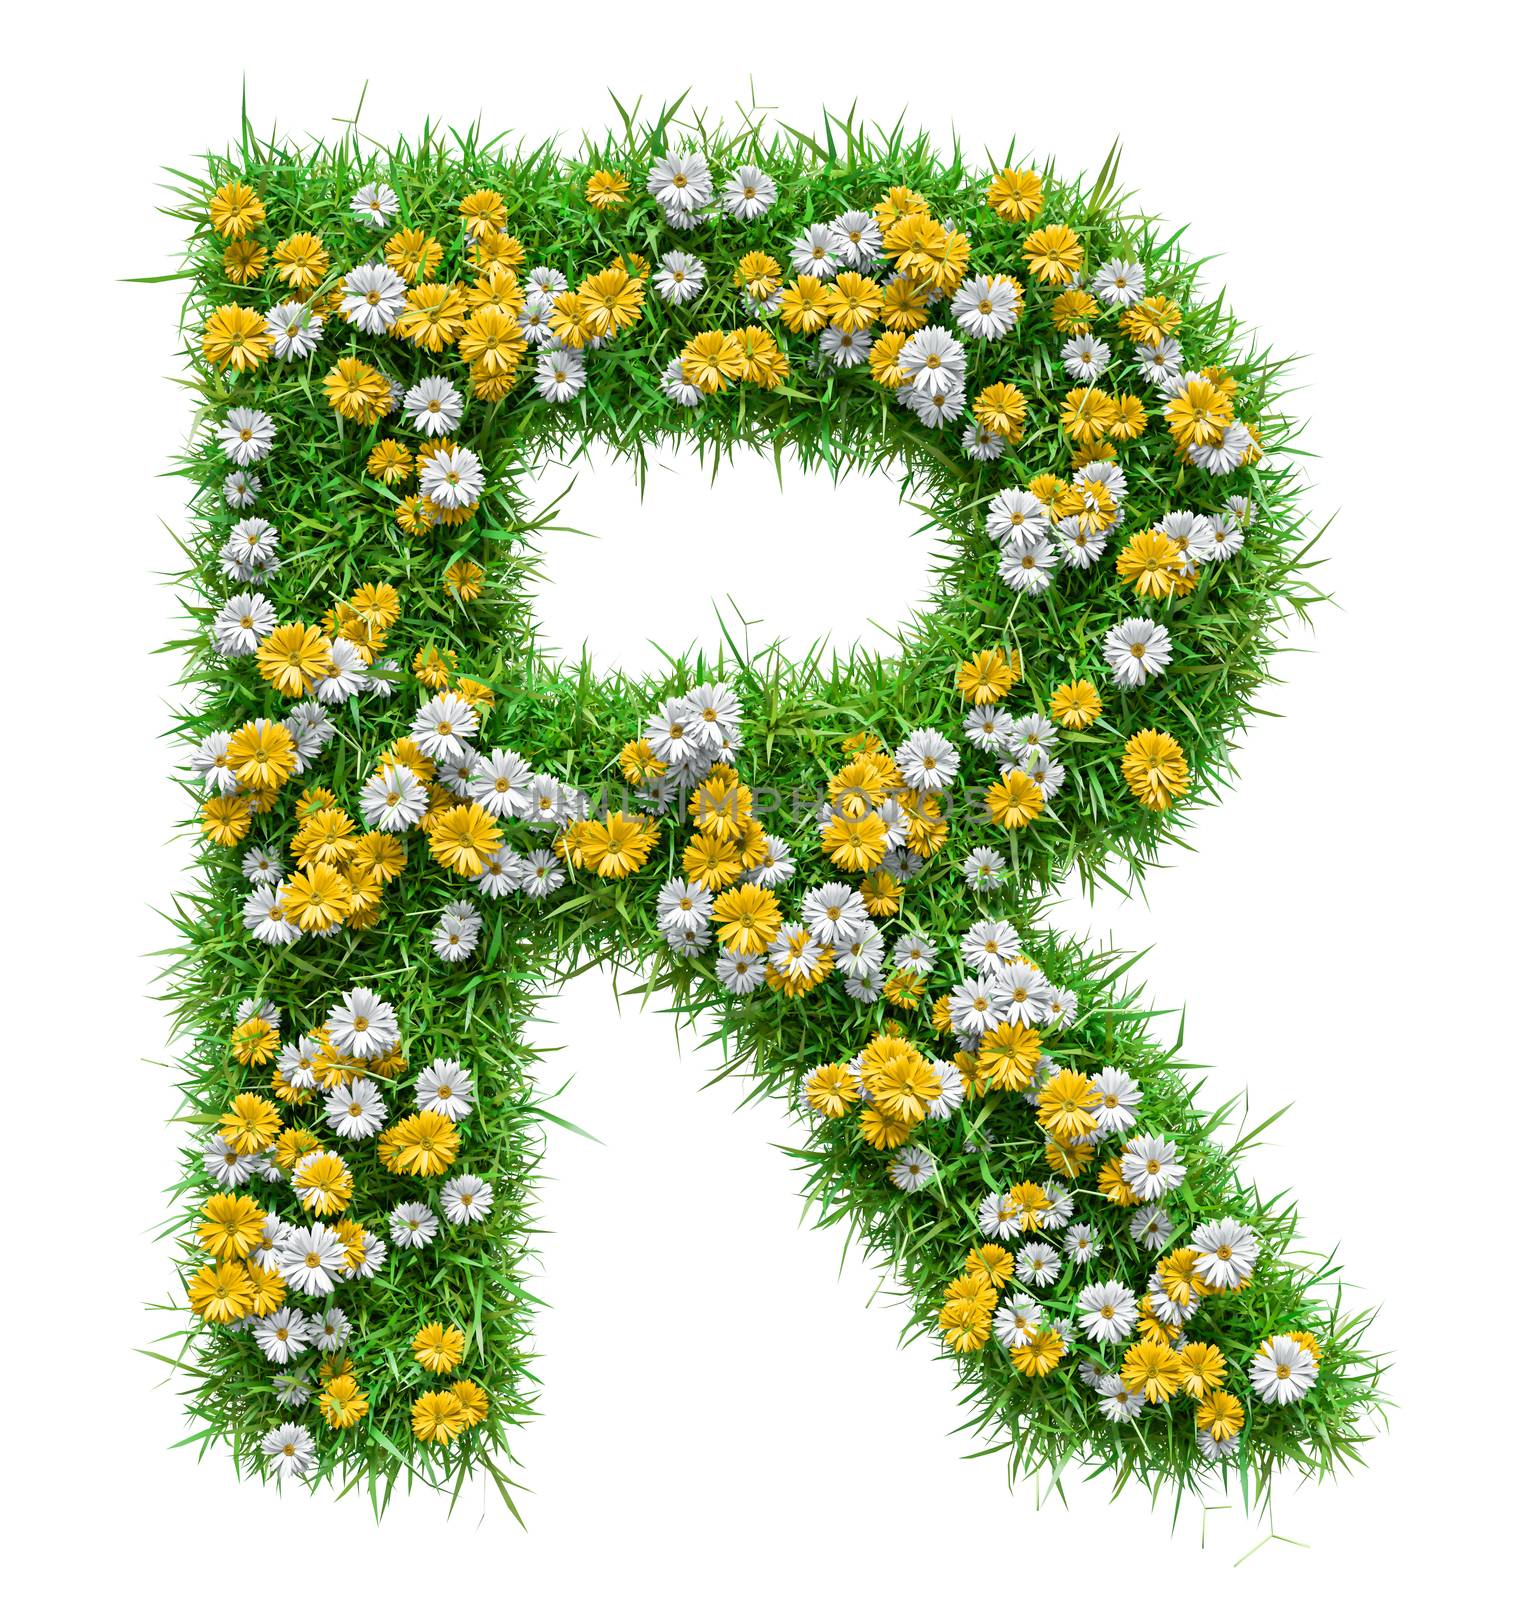 Letter R Of Green Grass And Flowers by cherezoff